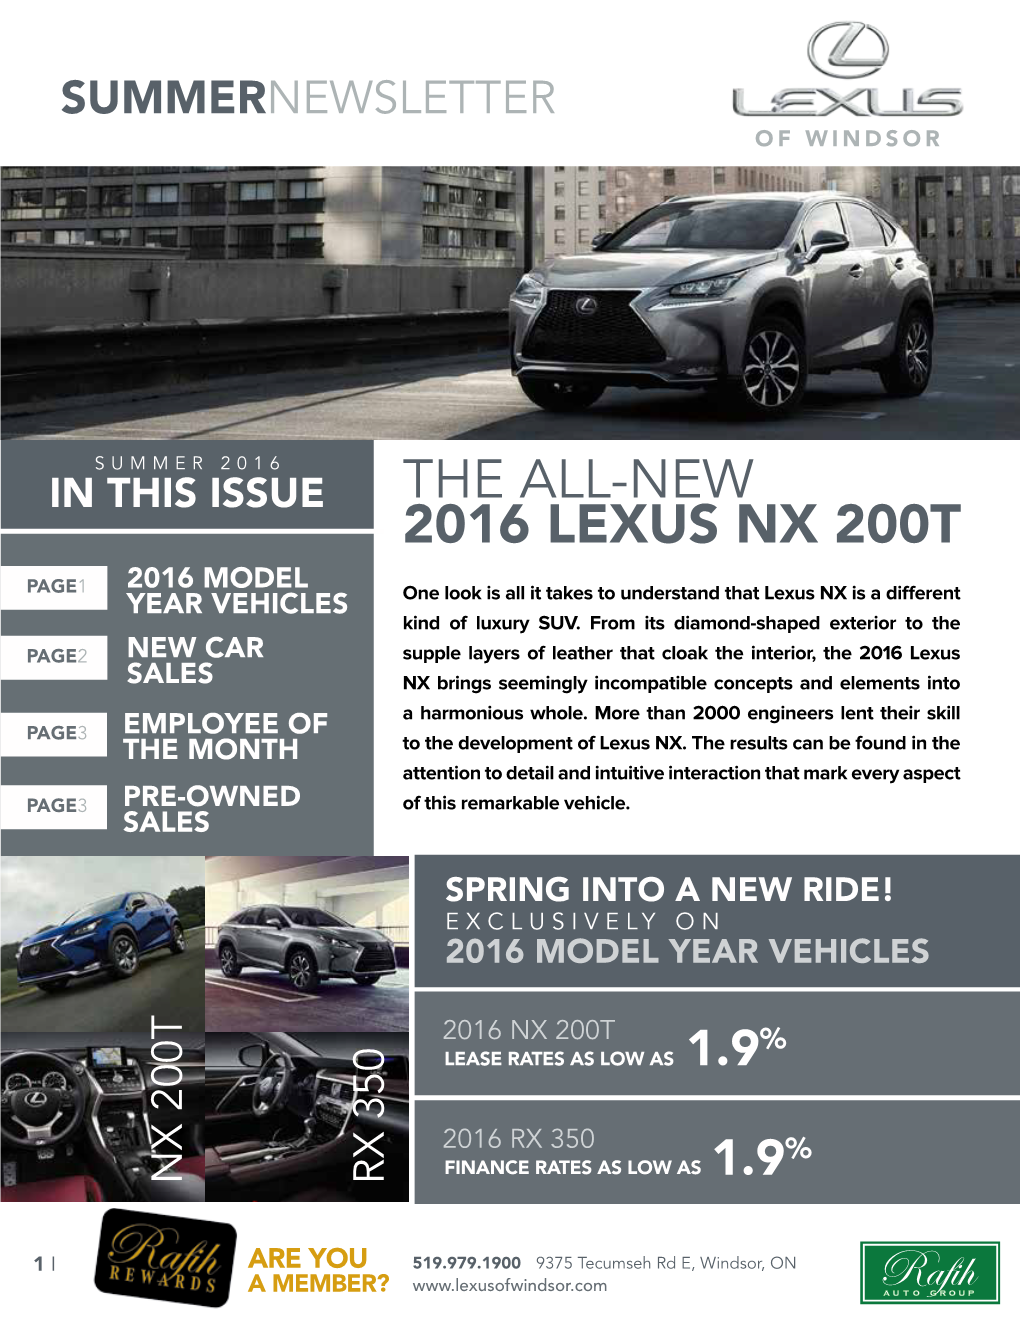 The All-New 2016 Lexus NX 200T Page1 2016 Model Year Vehicles One Look Is All It Takes to Understand That Lexus NX Is a Different Kind of Luxury SUV